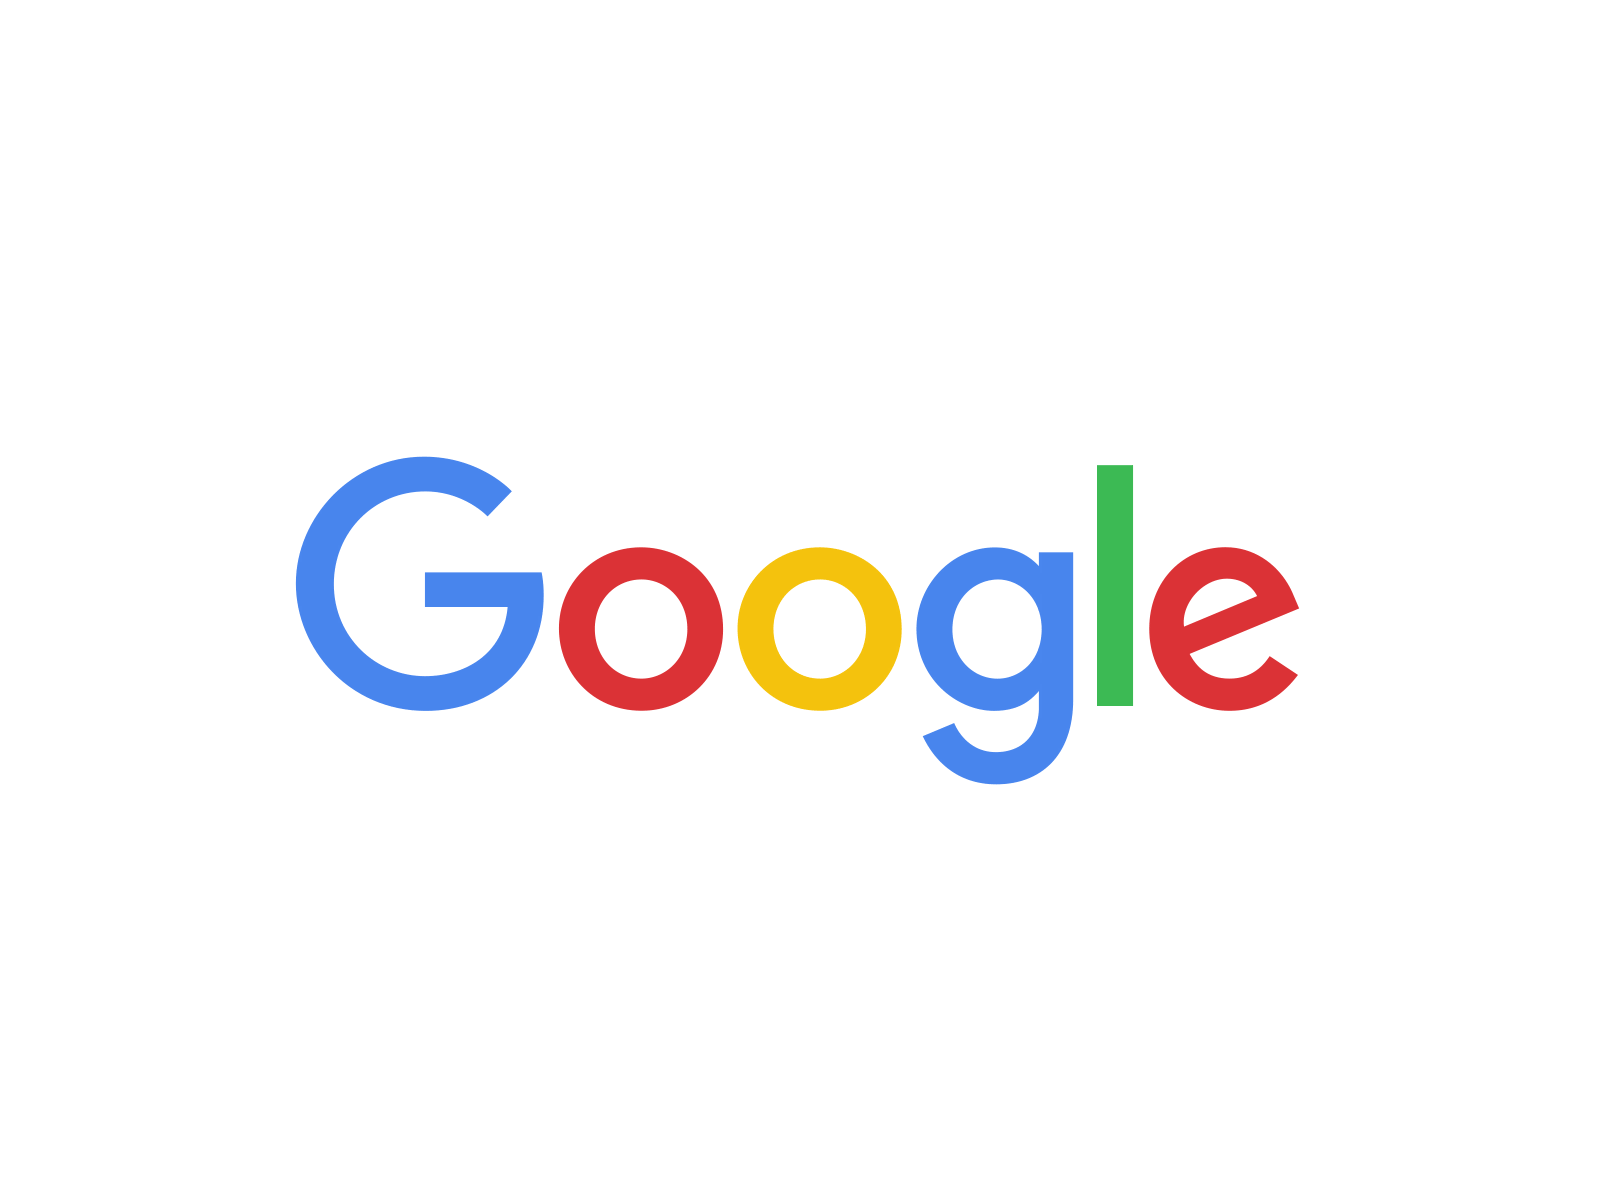 Google Logo Animation by Quang Nguyen on Dribbble